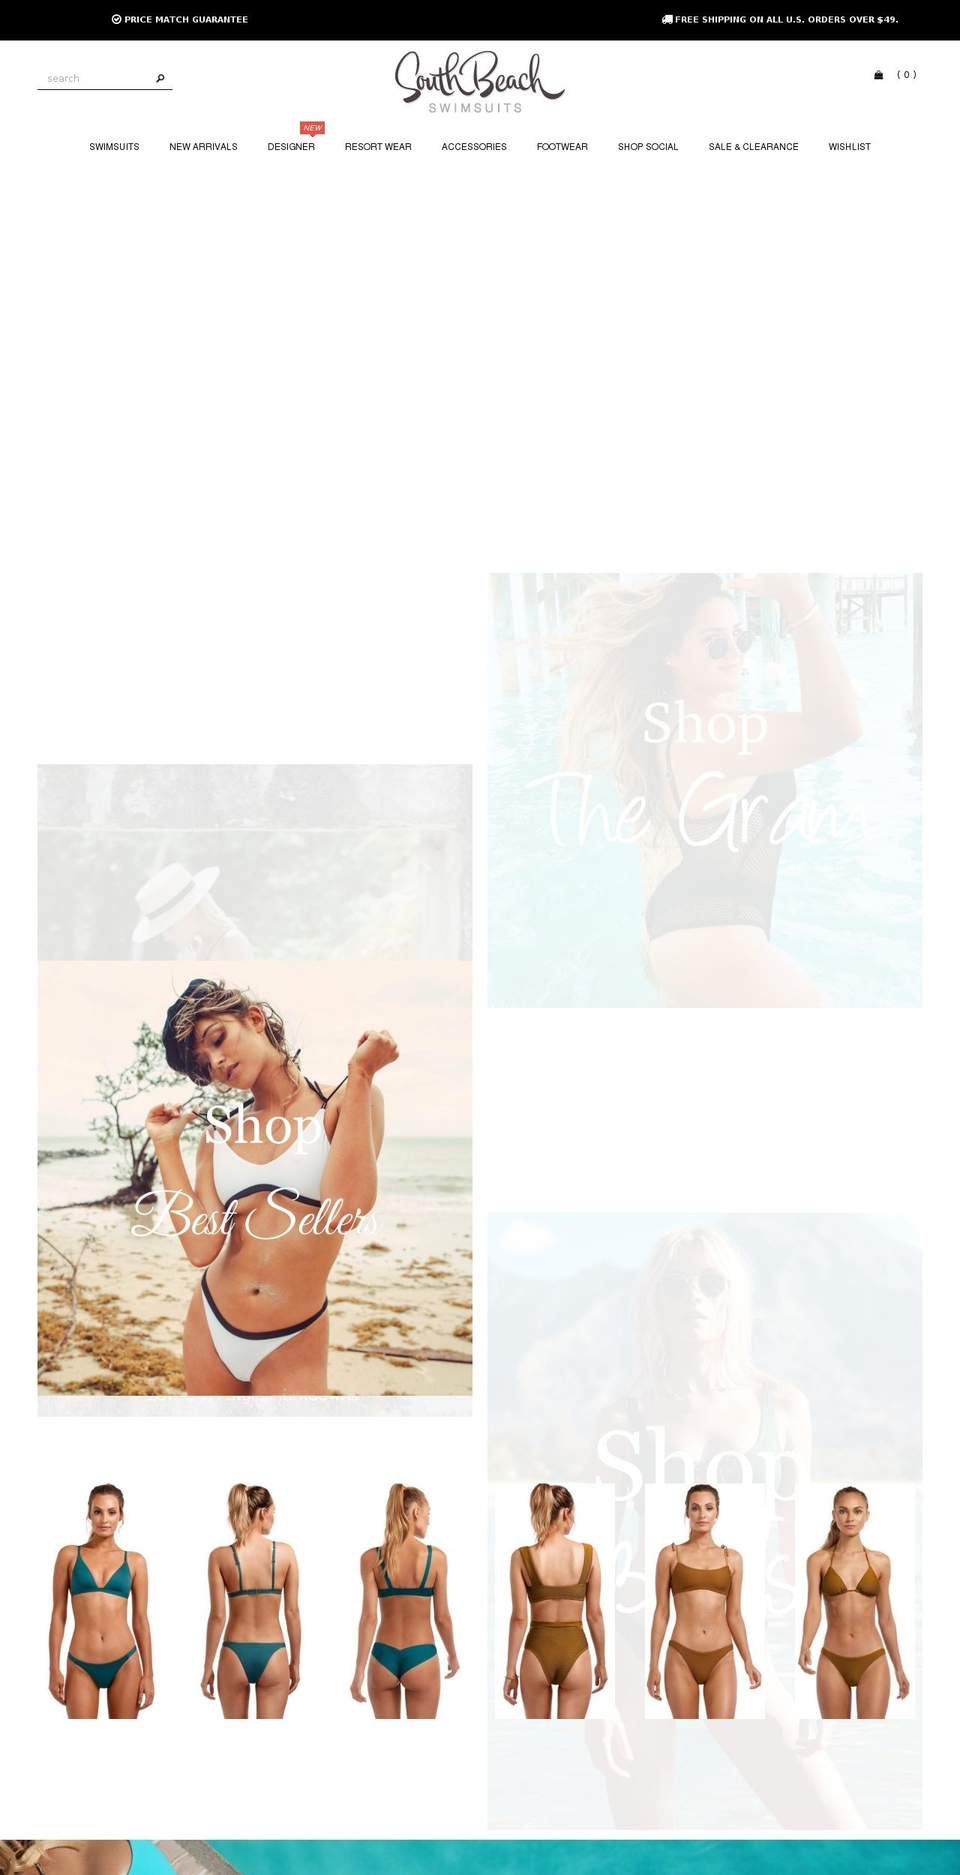 southbeachswimsuits.style shopify website screenshot